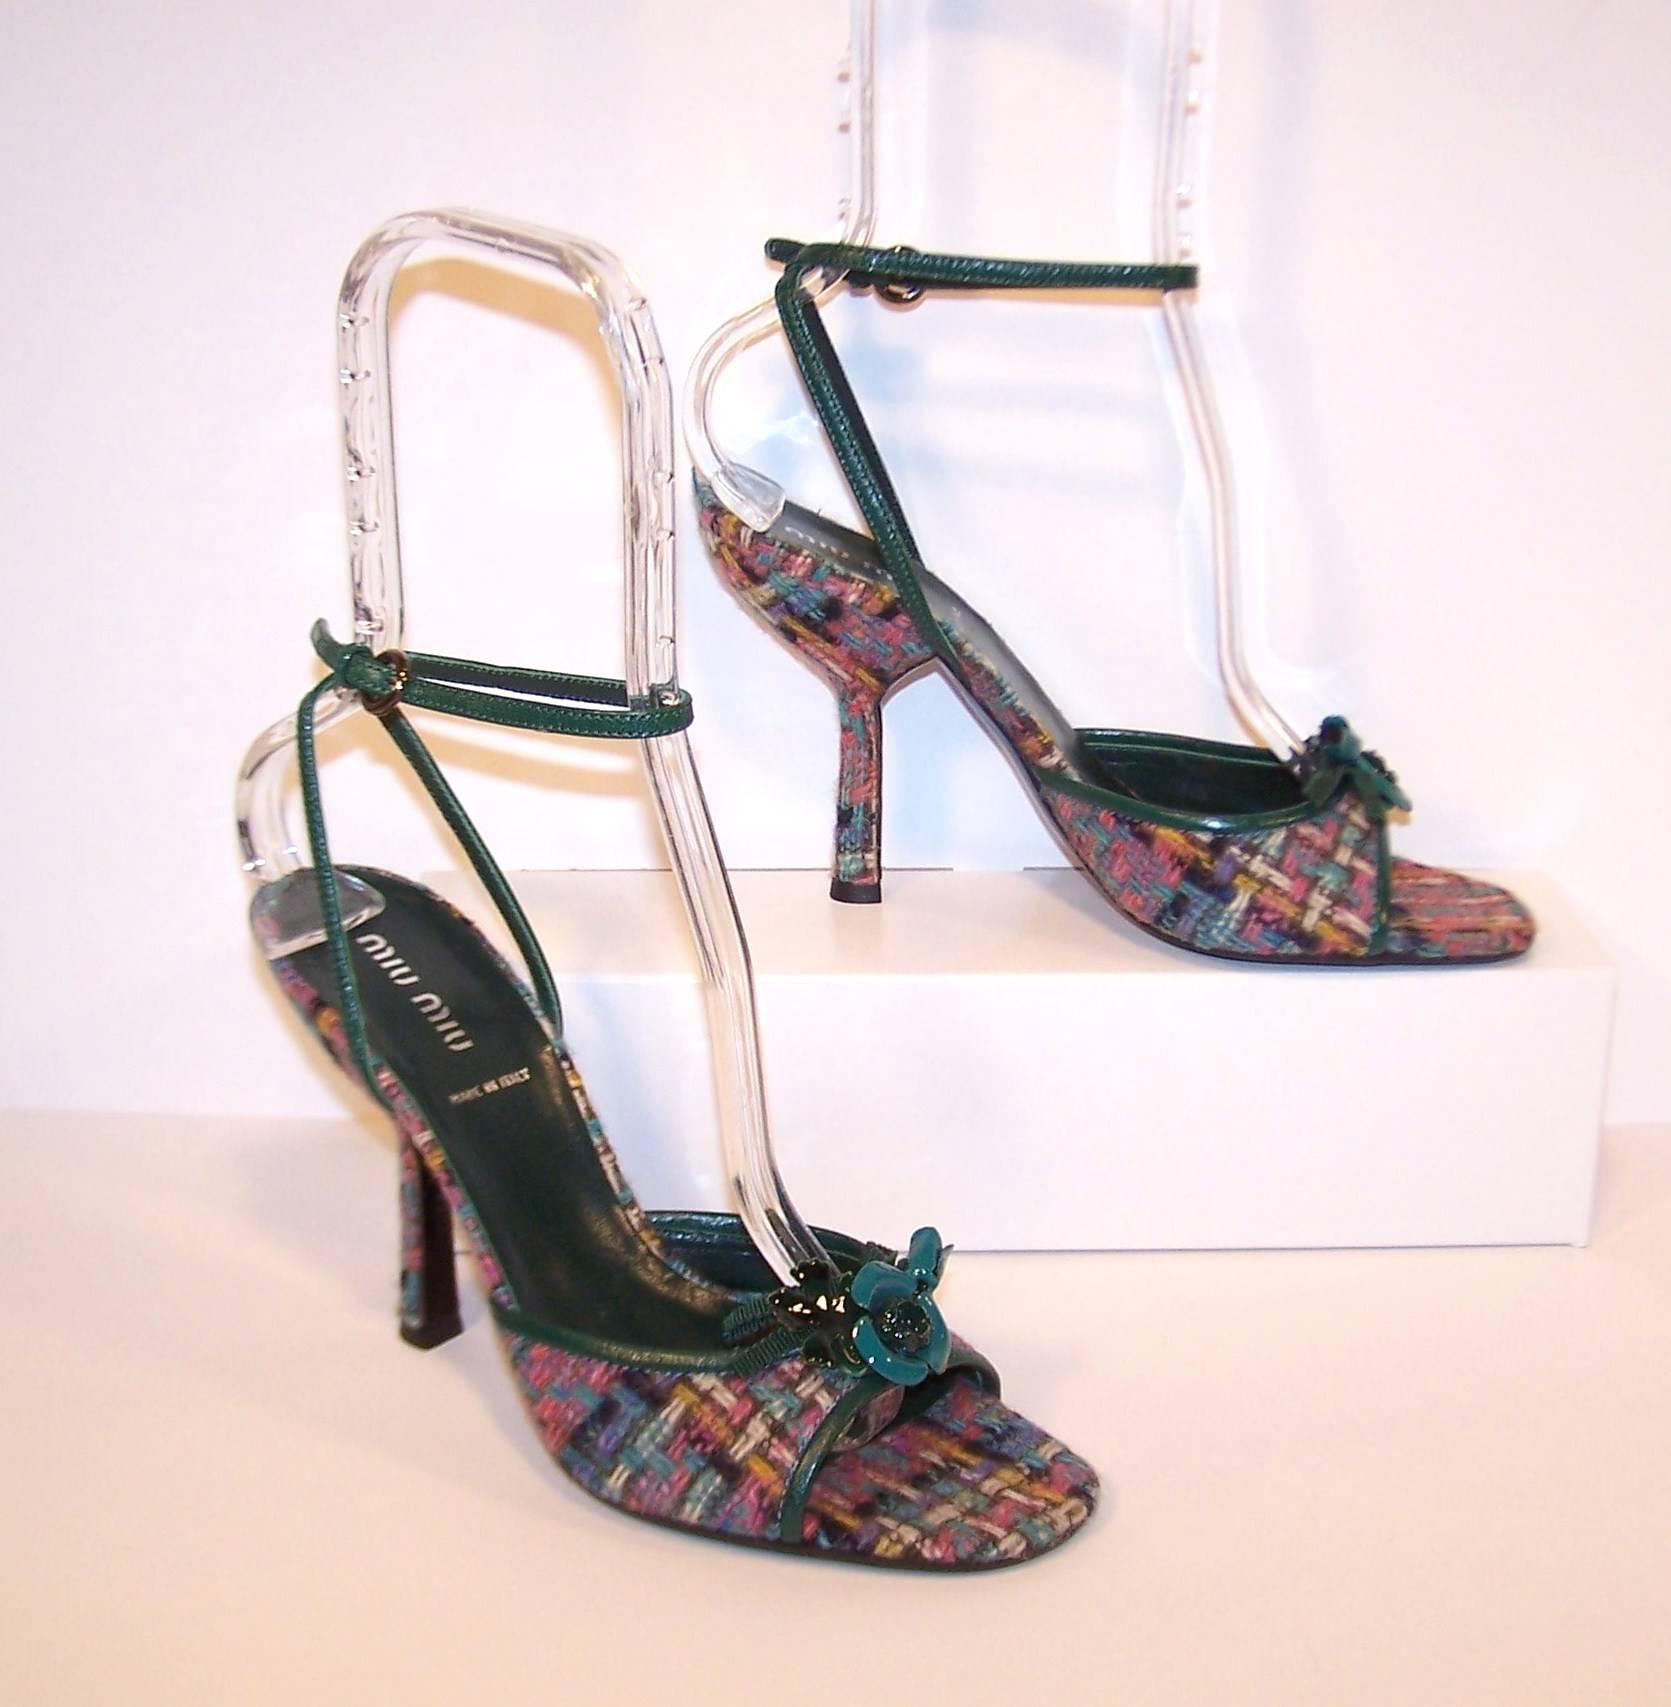 These contemporary Miu Miu sandals are reminiscent of ladylike strappy sandals and peep toe shoes from the 1950's.  The body and heel are wrapped in a colorful wool tweed ... pink, purple, winter white, charcoal, blue and green.  The trim and straps